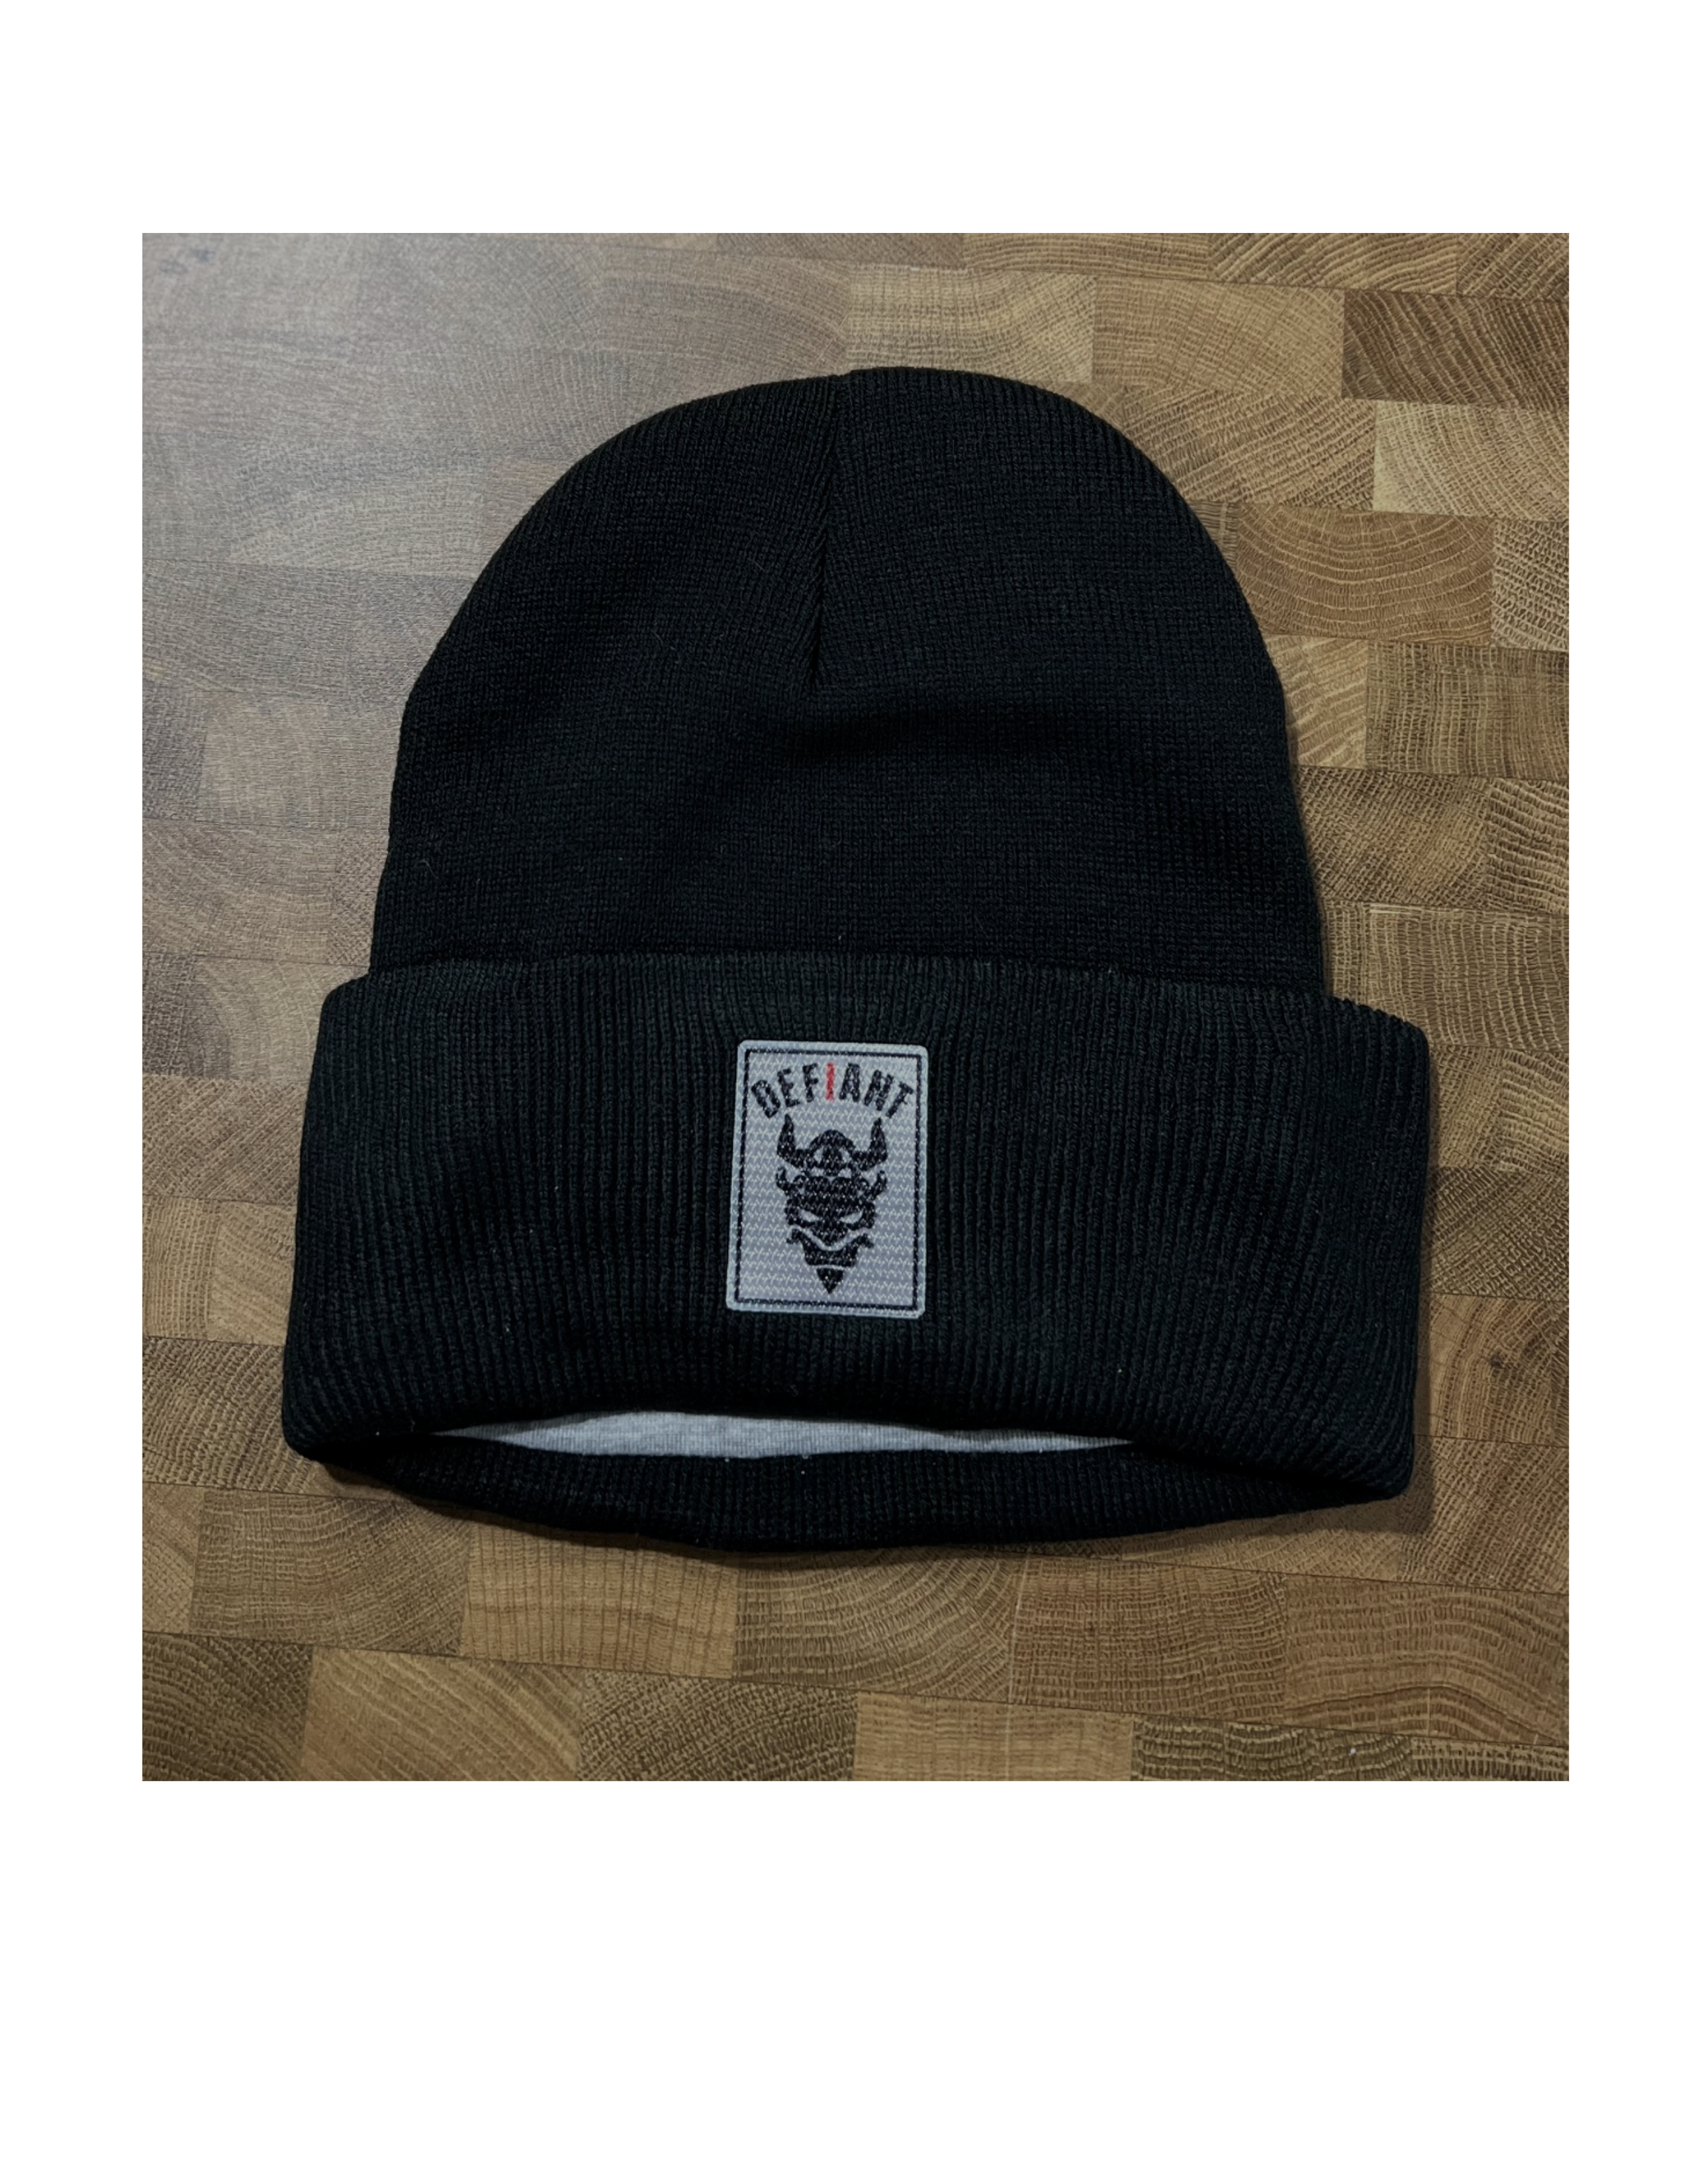 CLASSIC CUFFED BEANIE HAT - WITH TEXTURED TWILL PATCH - BLACK - LTD STOCK